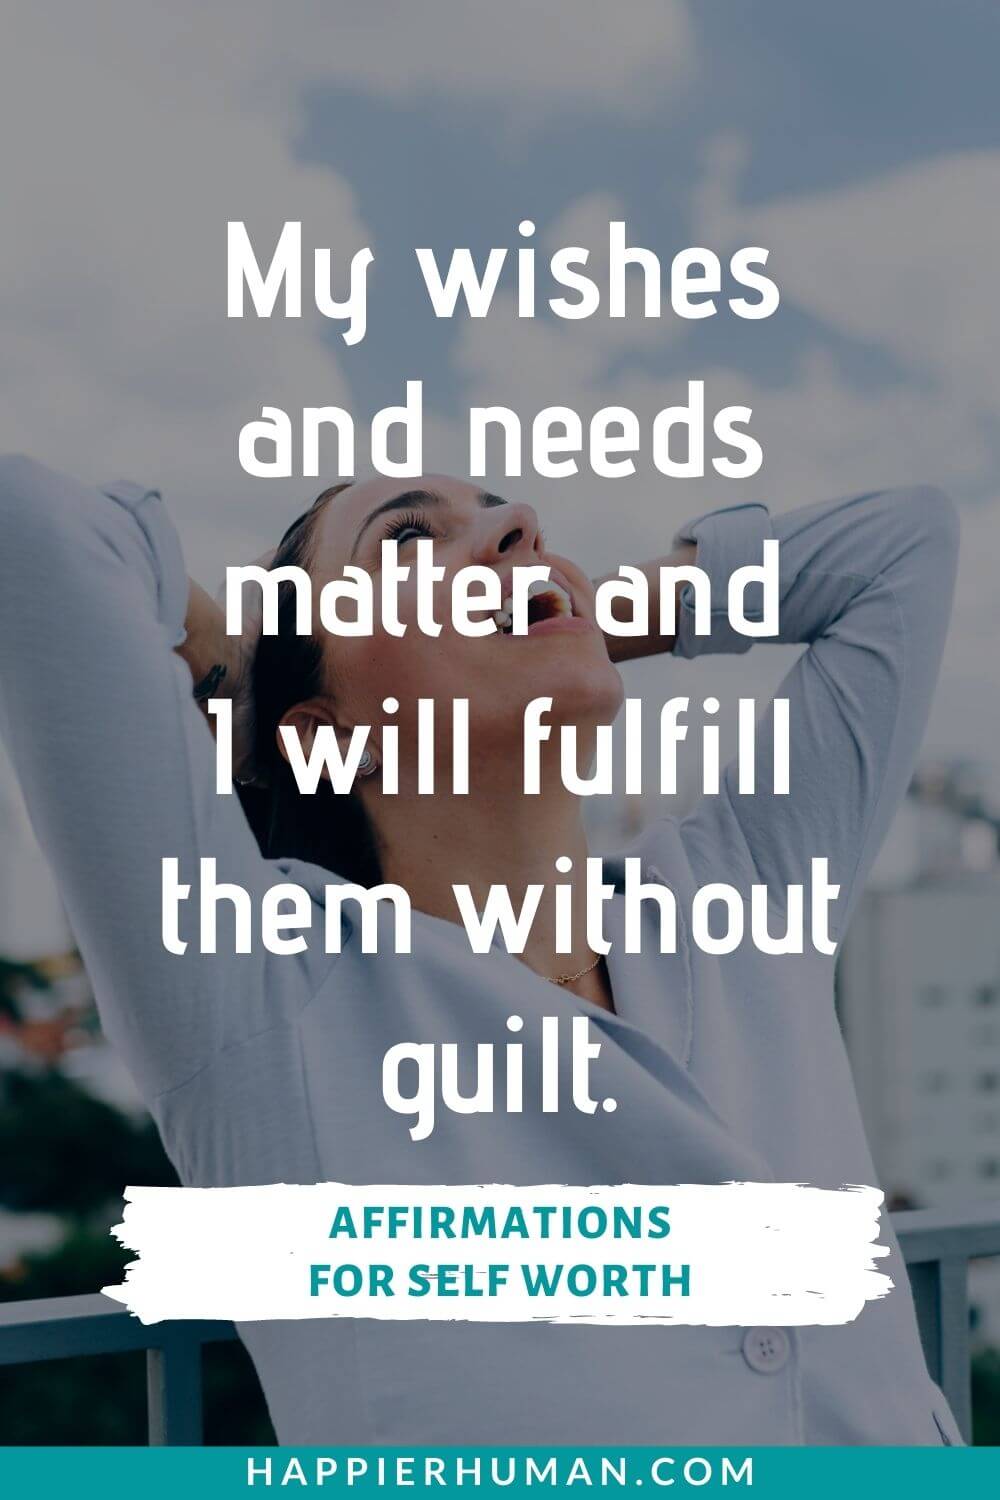 Affirmations for Self Worth - My wishes and needs matter and I will fulfill them without guilt. | affirmations for confidence and health | self-esteem affirmations pdf | gratitude affirmations for self love